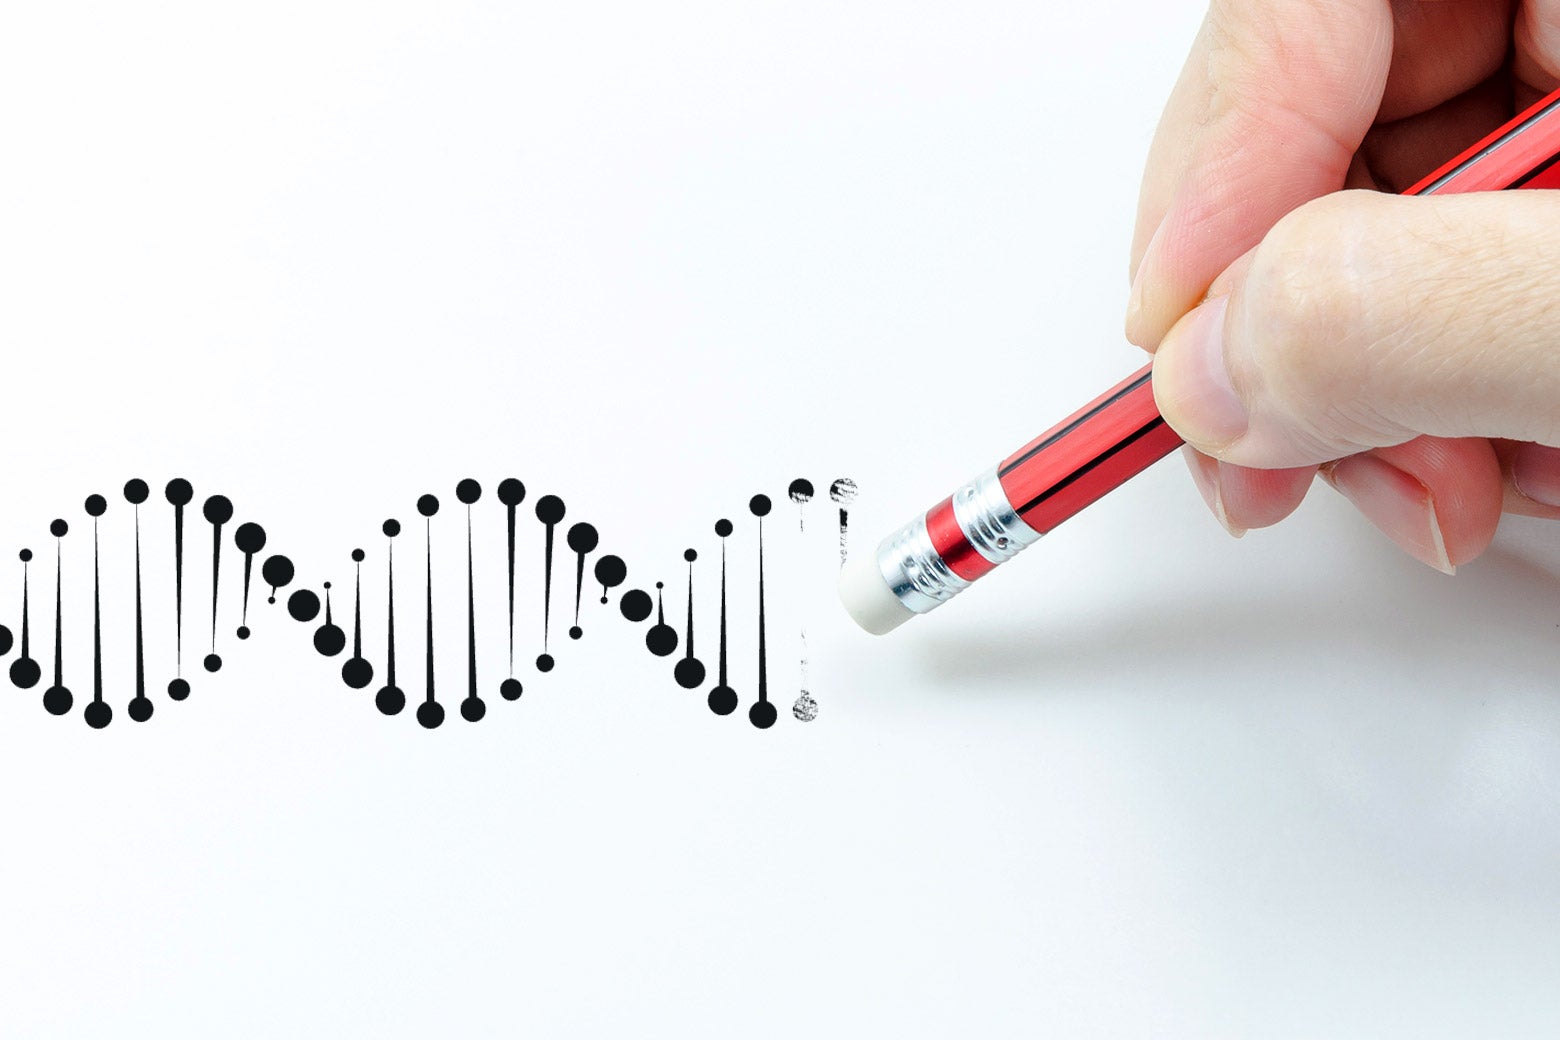 A photo illustration of a pencil erasing part of a double helix